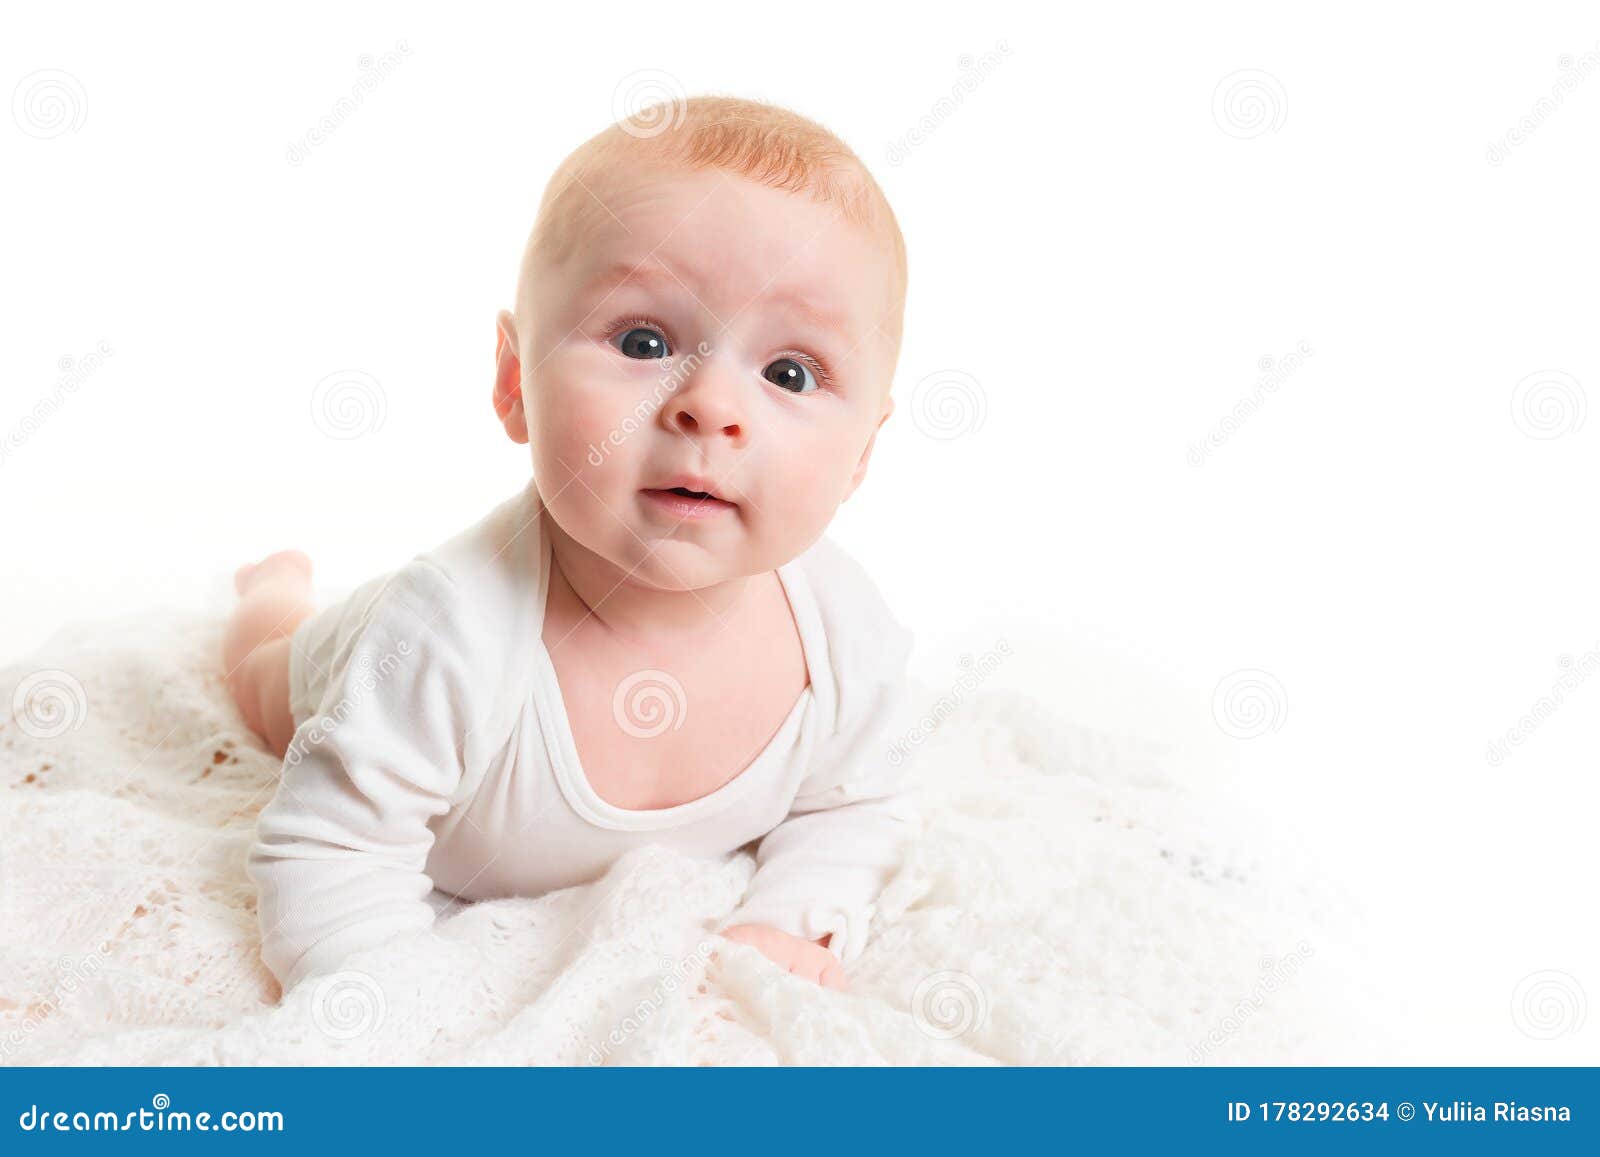 A Small 4 Month Old Baby Lies on a Soft Light Blanket and Looks at the ...